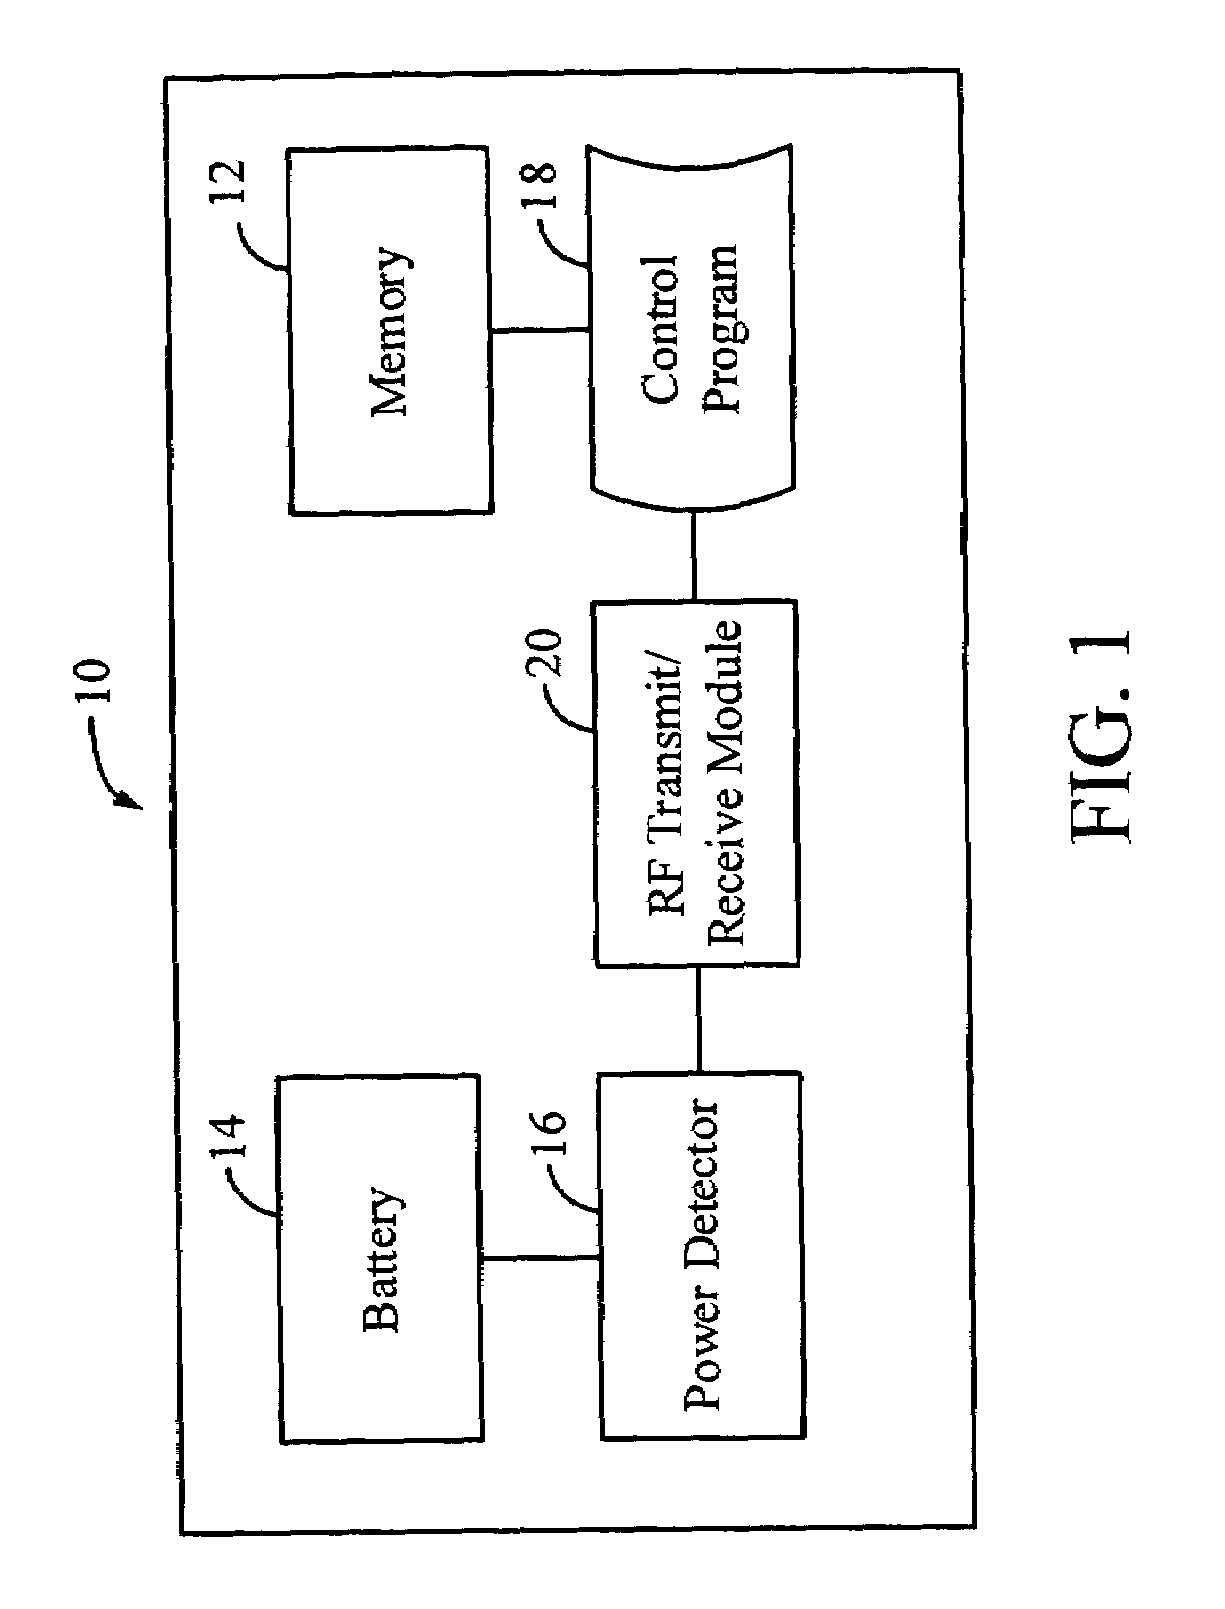 Mobile station apparatus capable of changing access control classes due to low battery condition for power saving and method of the same